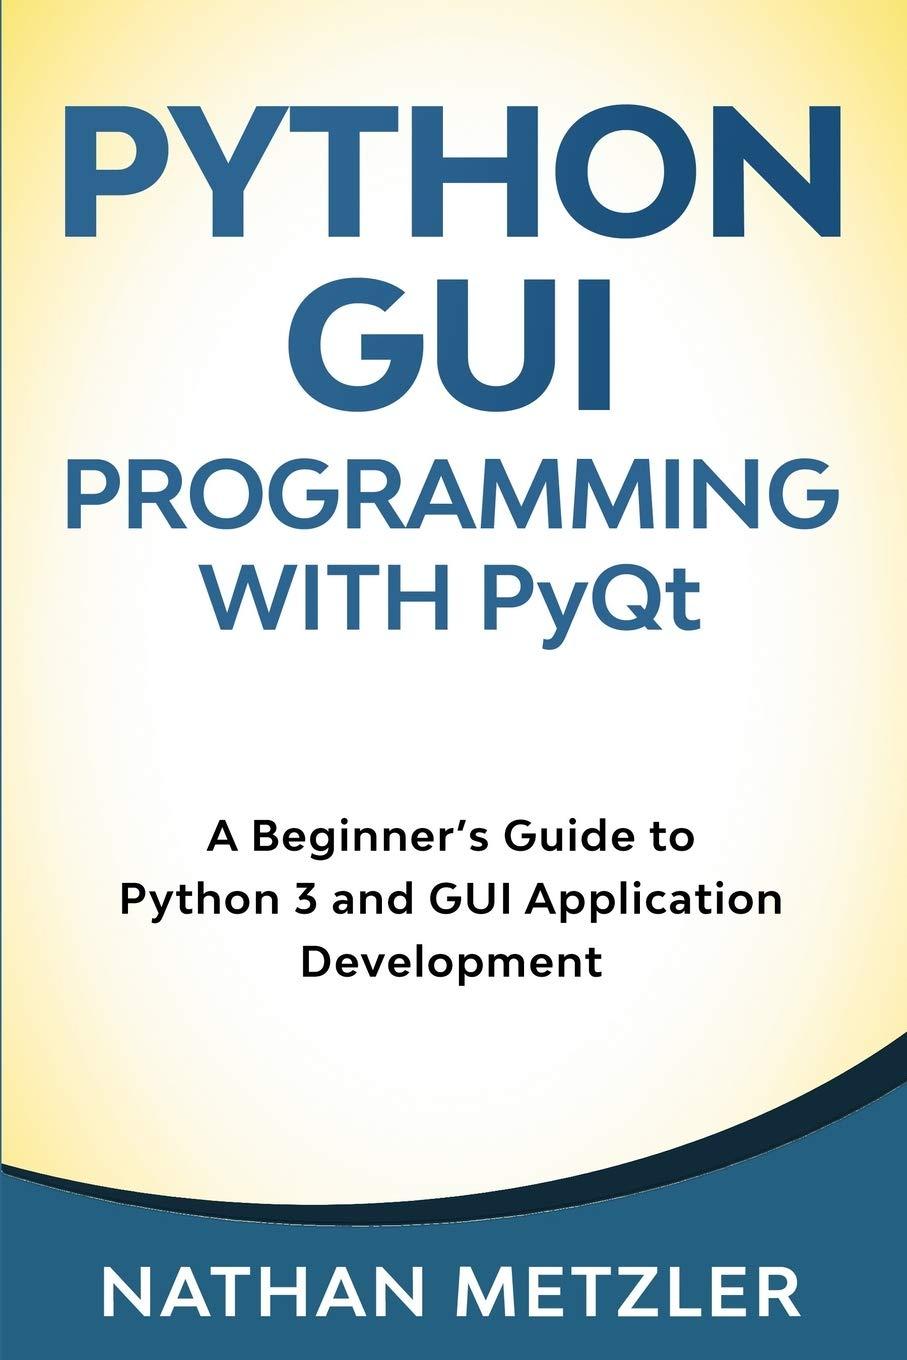 python gui programming with pyqt a beginner’s guide to python 3 and gui application development 1st edition